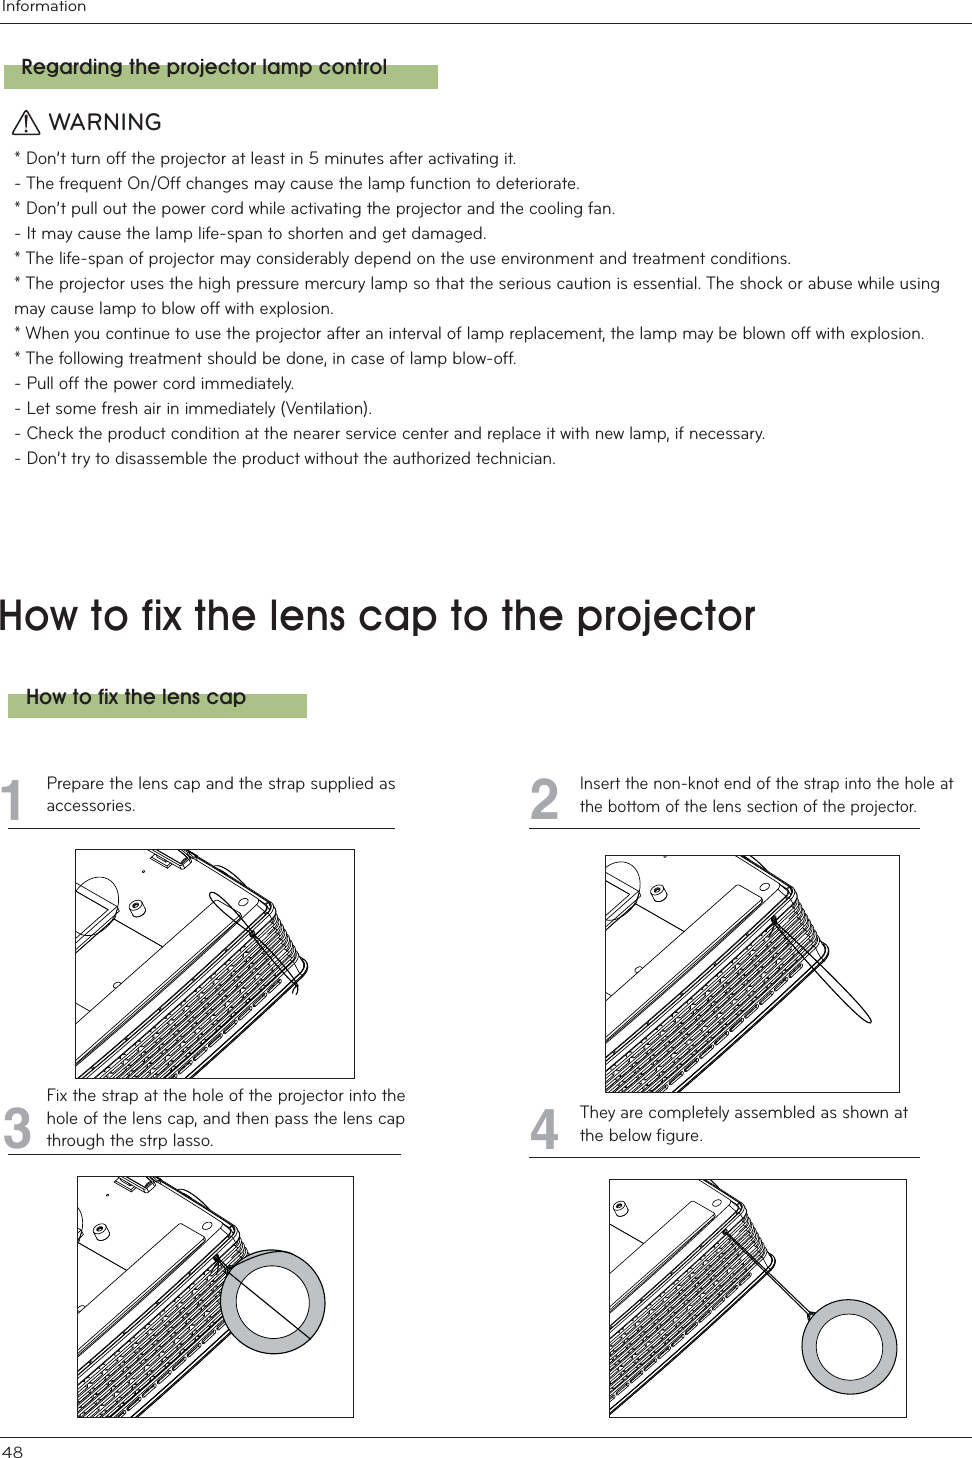 Information48&lt;ckhcZ]lh\Y`YbgWUdhch\Ydfc^YWhcfPrepare the lens cap and the strap supplied asaccessories.Insert the non-knot end of the strap into the hole atthe bottom of the lens section of the projector.Fix the strap at the hole of the projector into thehole of the lens cap, and then pass the lens capthrough the strp lasso.465They are completely assembled as shown atthe below figure.7&lt;ckhcZ]lh\Y`YbgWUdFY[UfX]b[h\Ydfc^YWhcf`UadWcbhfc`* Don’t turn off the projector at least in 5 minutes after activating it.- The frequent On/Off changes may cause the lamp function to deteriorate.* Don’t pull out the power cord while activating the projector and the cooling fan.- It may cause the lamp life-span to shorten and get damaged.* The life-span of projector may considerably depend on the use environment and treatment conditions.* The projector uses the high pressure mercury lamp so that the serious caution is essential. The shock or abuse while using may cause lamp to blow off with explosion.* When you continue to use the projector after an interval of lamp replacement, the lamp may be blown off with explosion.* The following treatment should be done, in case of lamp blow-off.- Pull off the power cord immediately.- Let some fresh air in immediately (Ventilation).- Check the product condition at the nearer service center and replace it with new lamp, if necessary.- Don’t try to disassemble the product without the authorized technician.WARNING